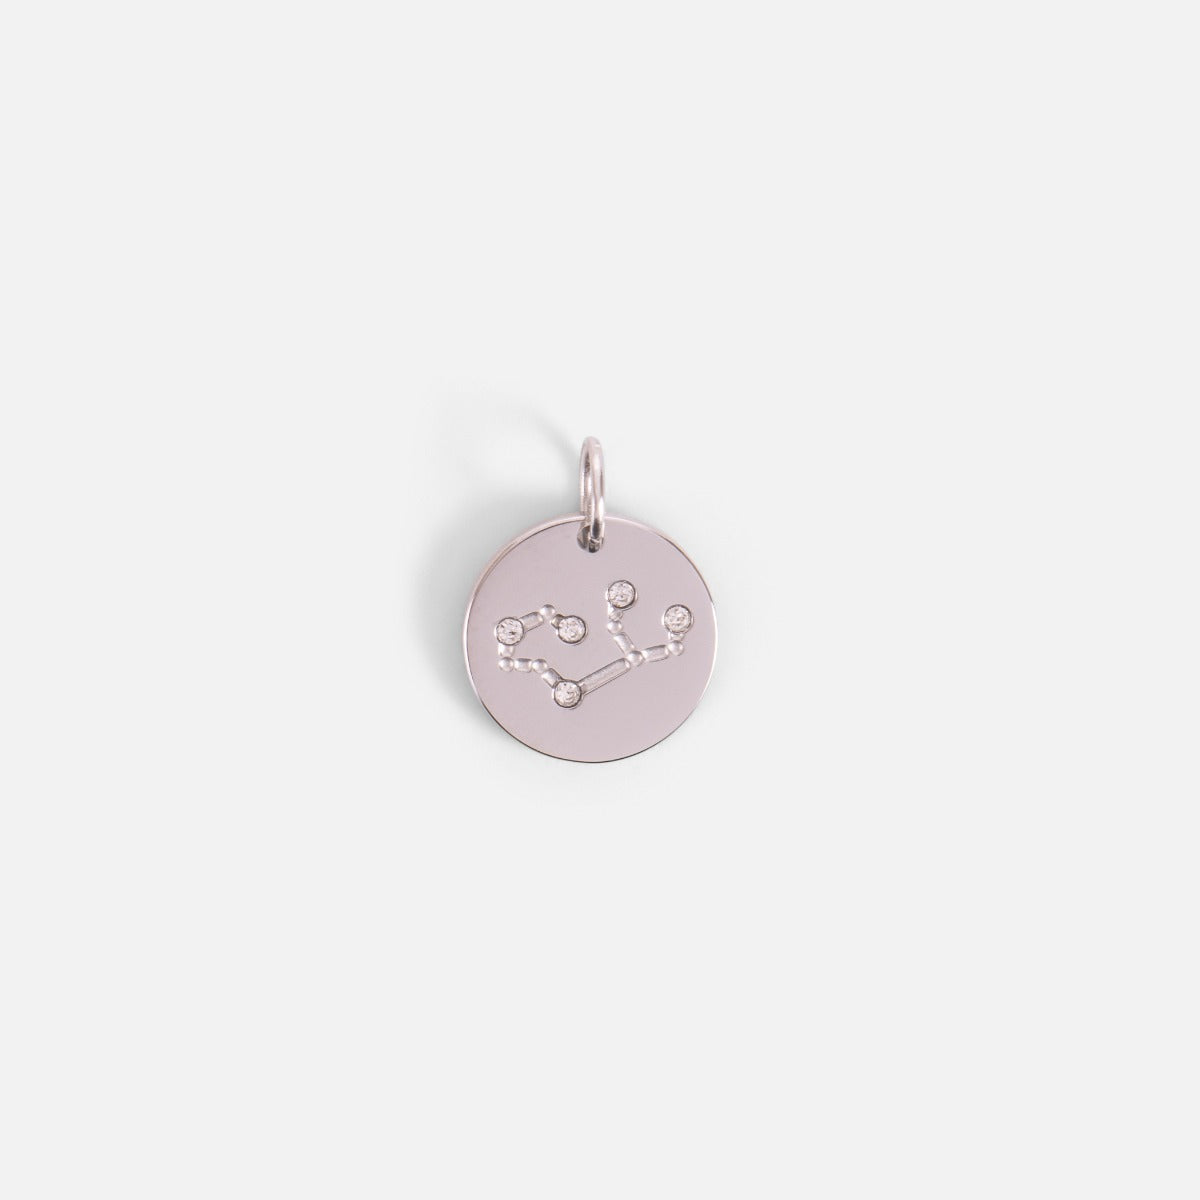 Small silvered charm engraved with the zodiac constellation "virgo"